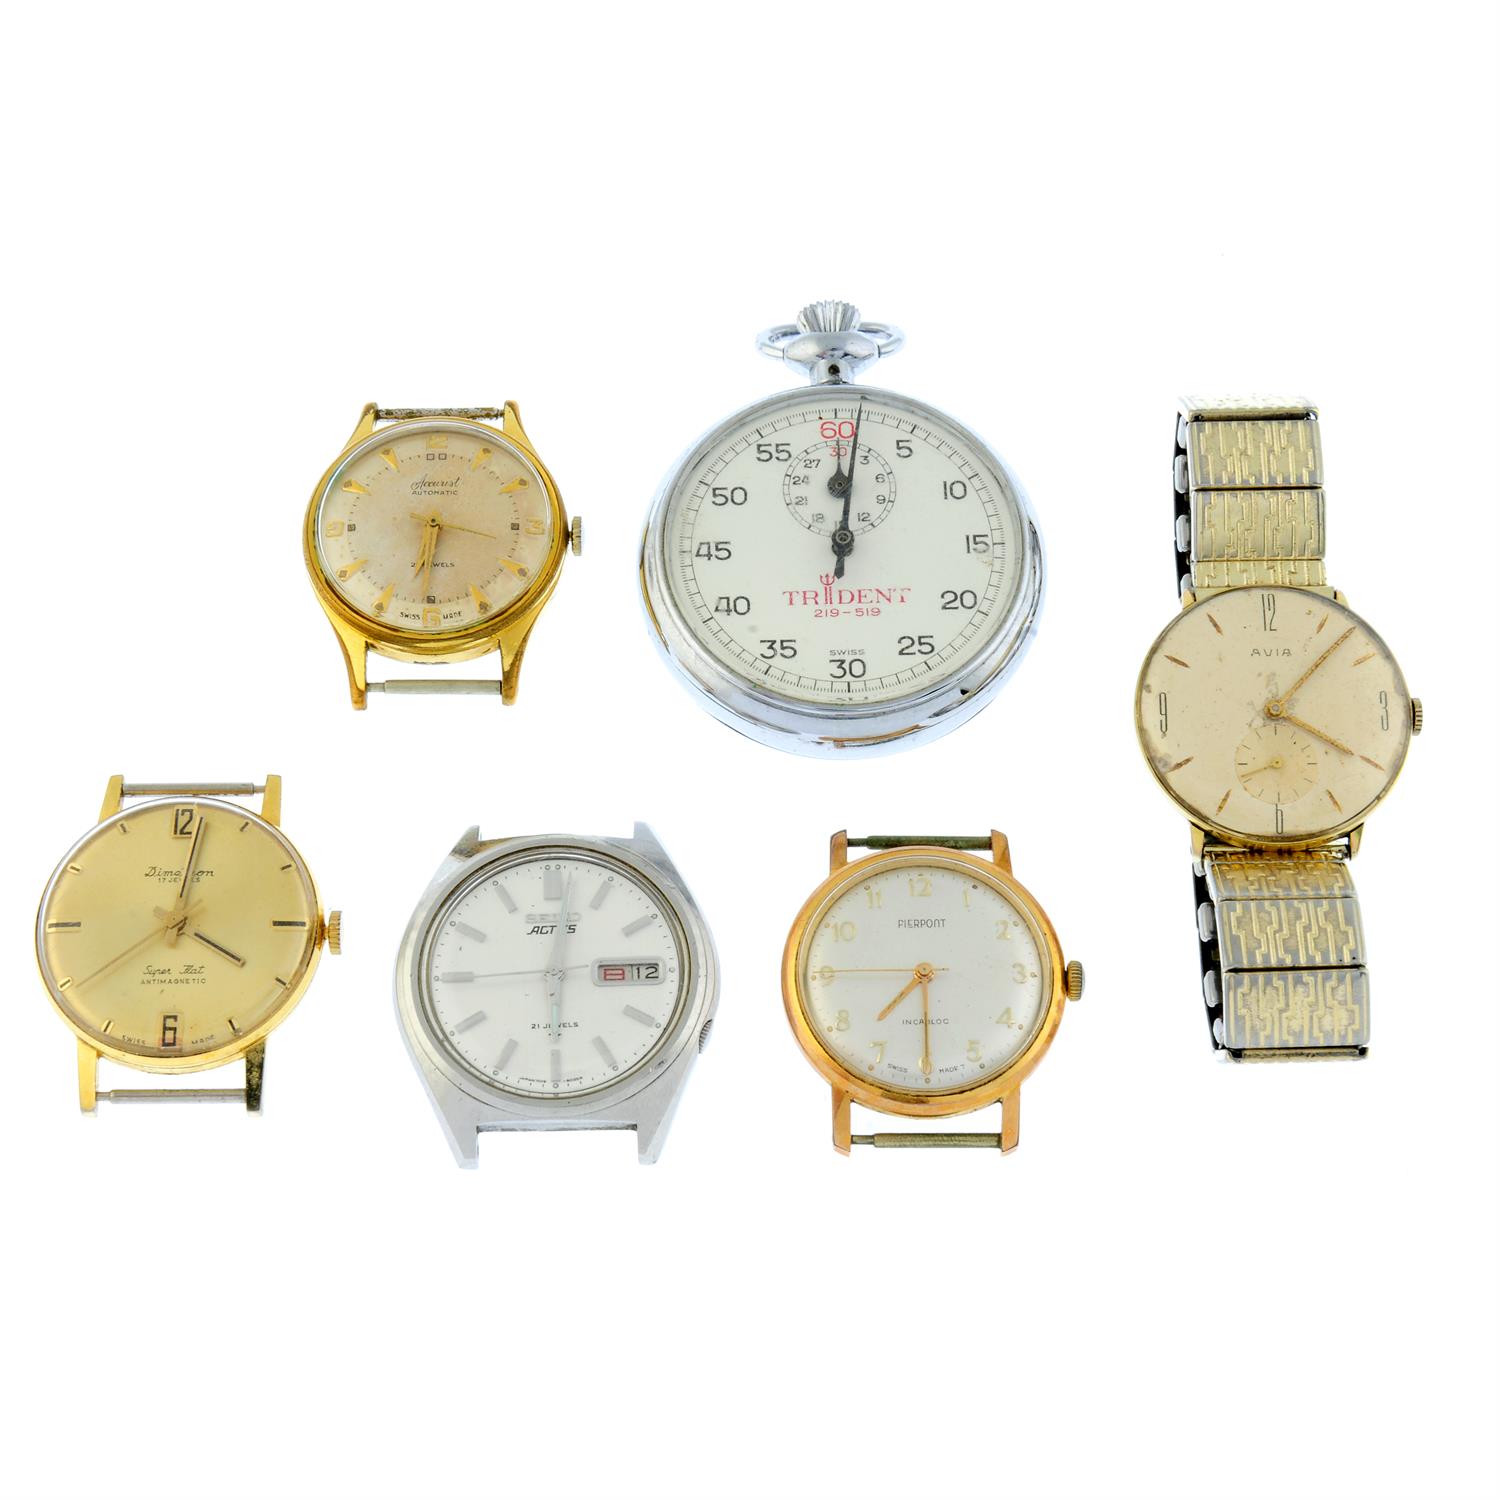 A group of four watch heads, a watch and a stopwatch.